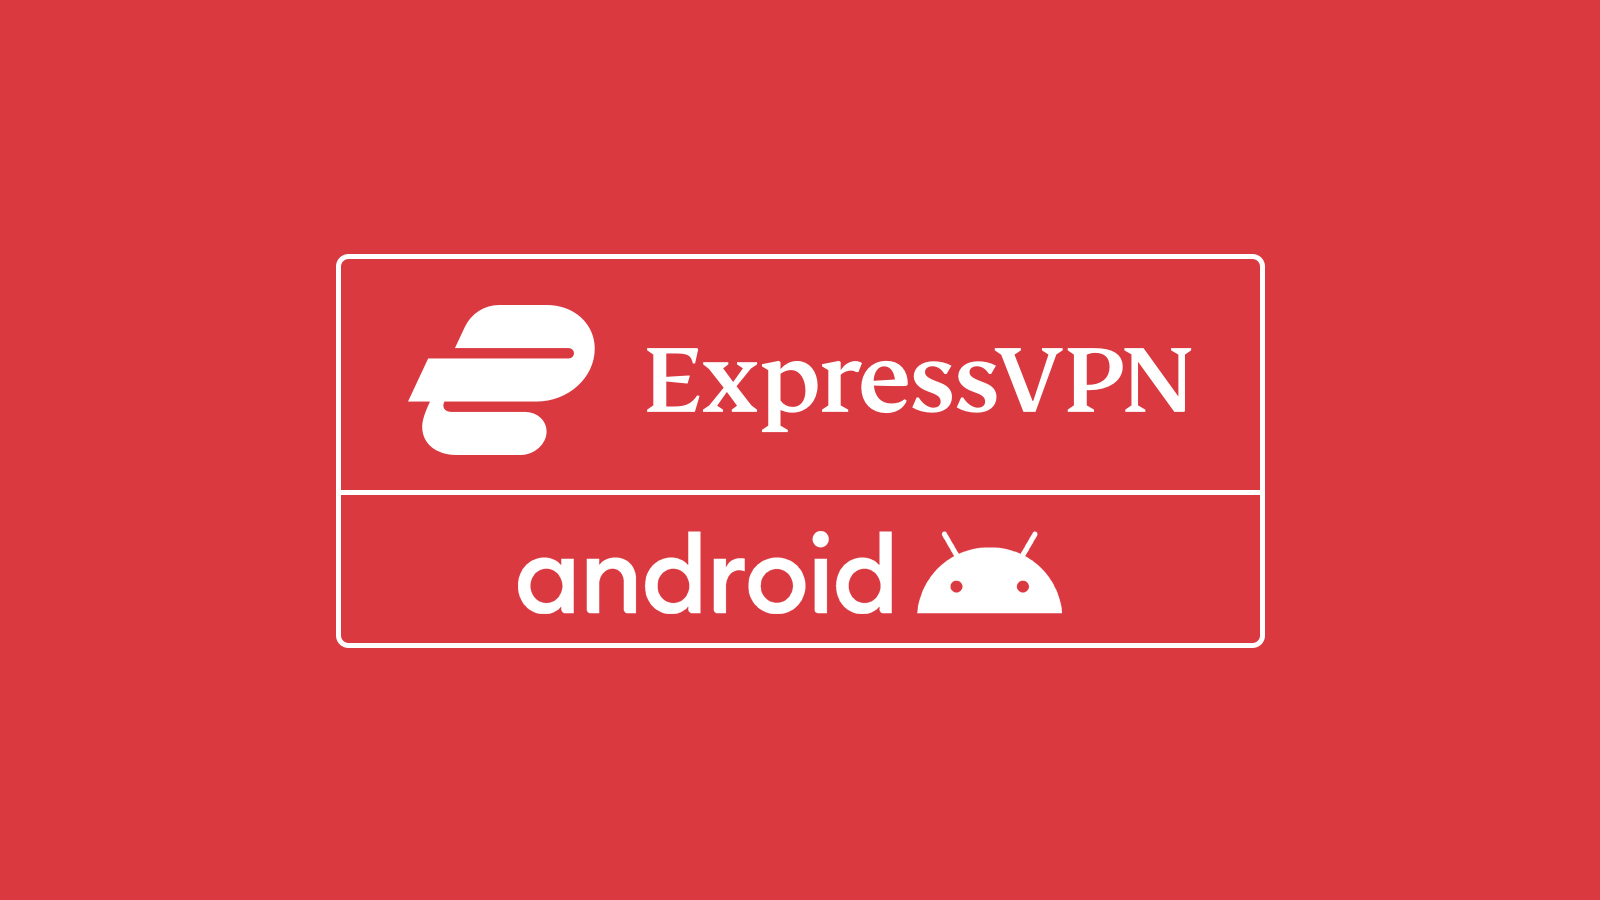 How to Download, Install & Use ExpressVPN on Android